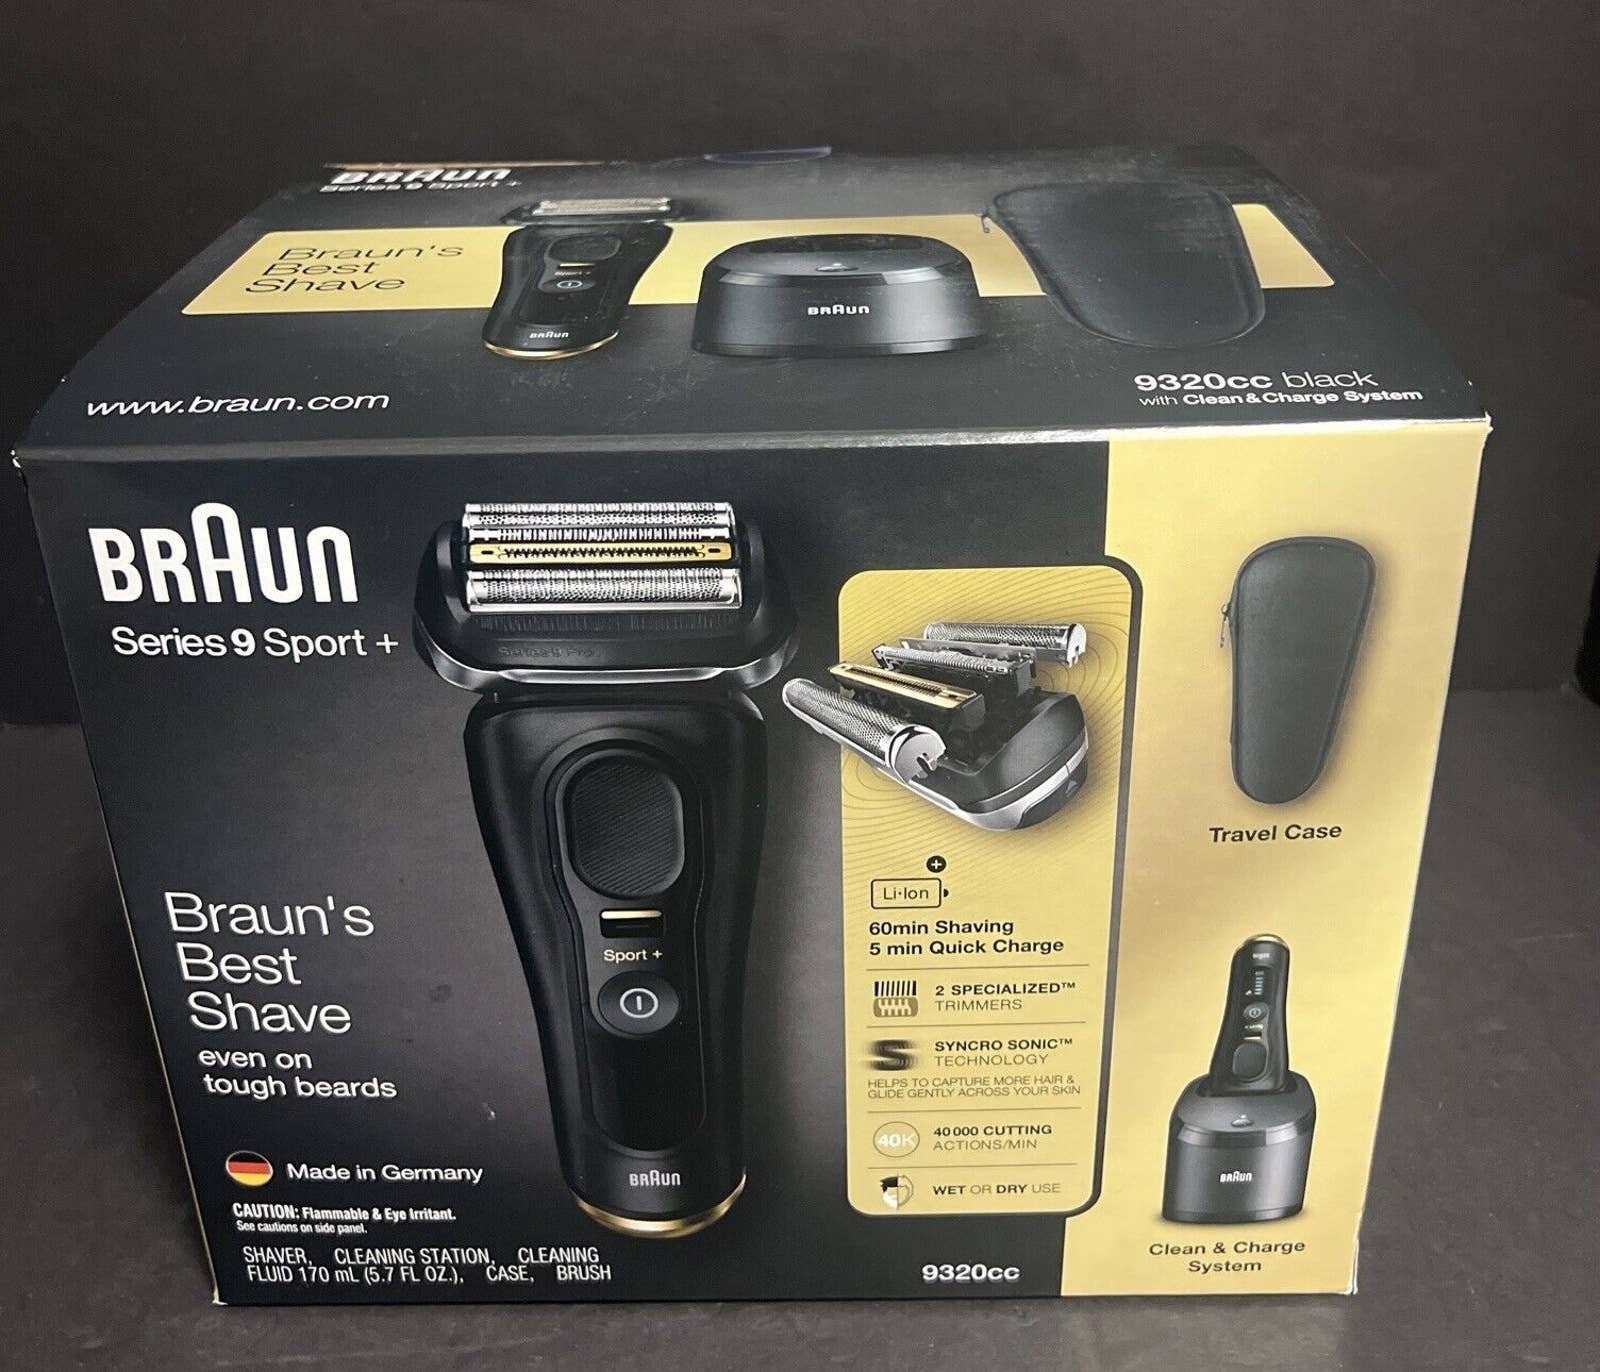  Braun Series 9 Sport Shaver with Clean and Charge